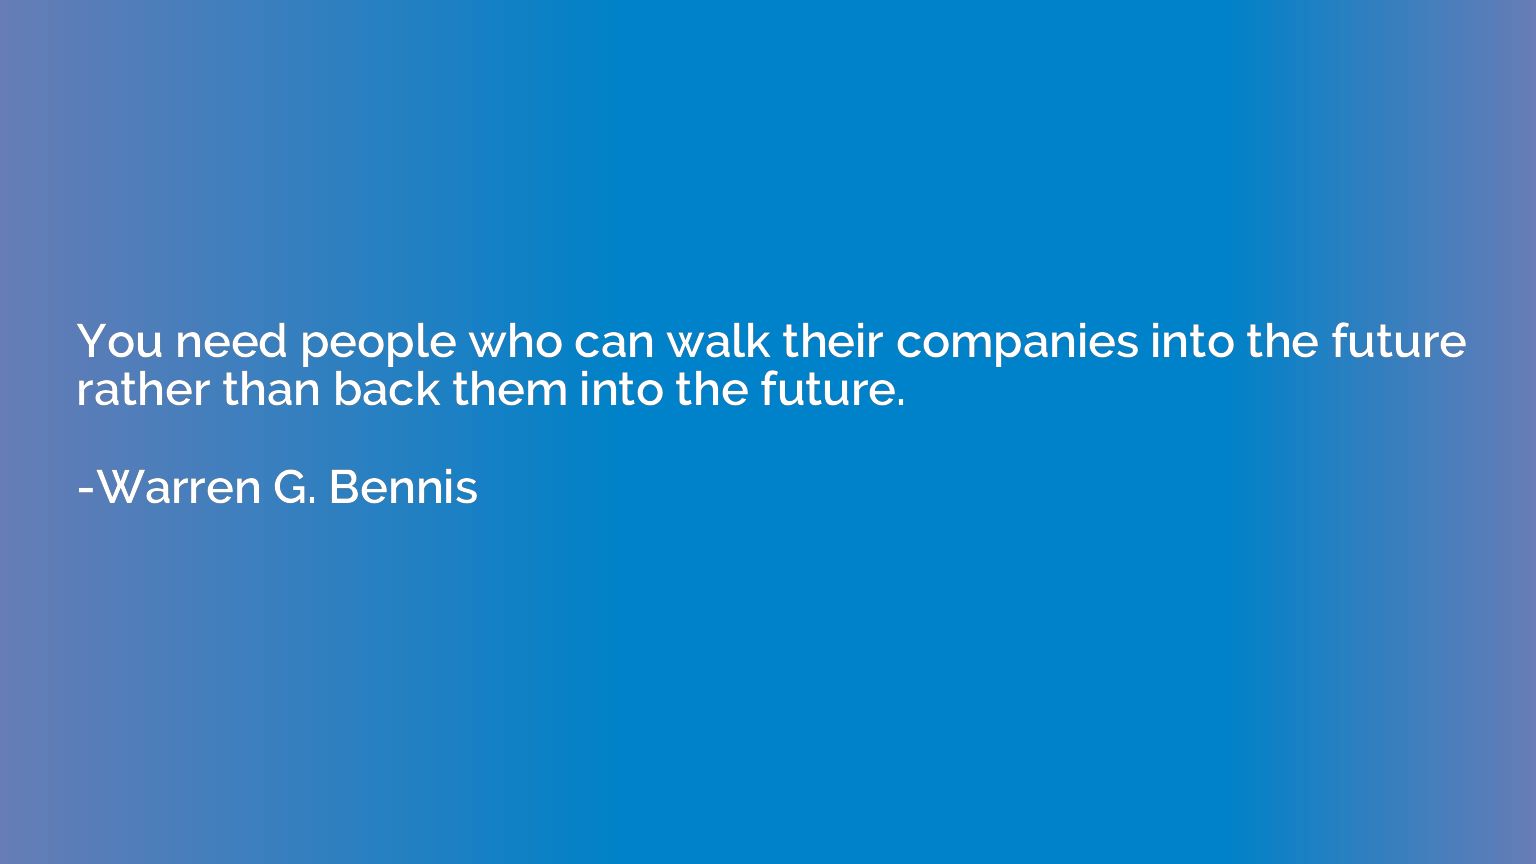 You need people who can walk their companies into the future